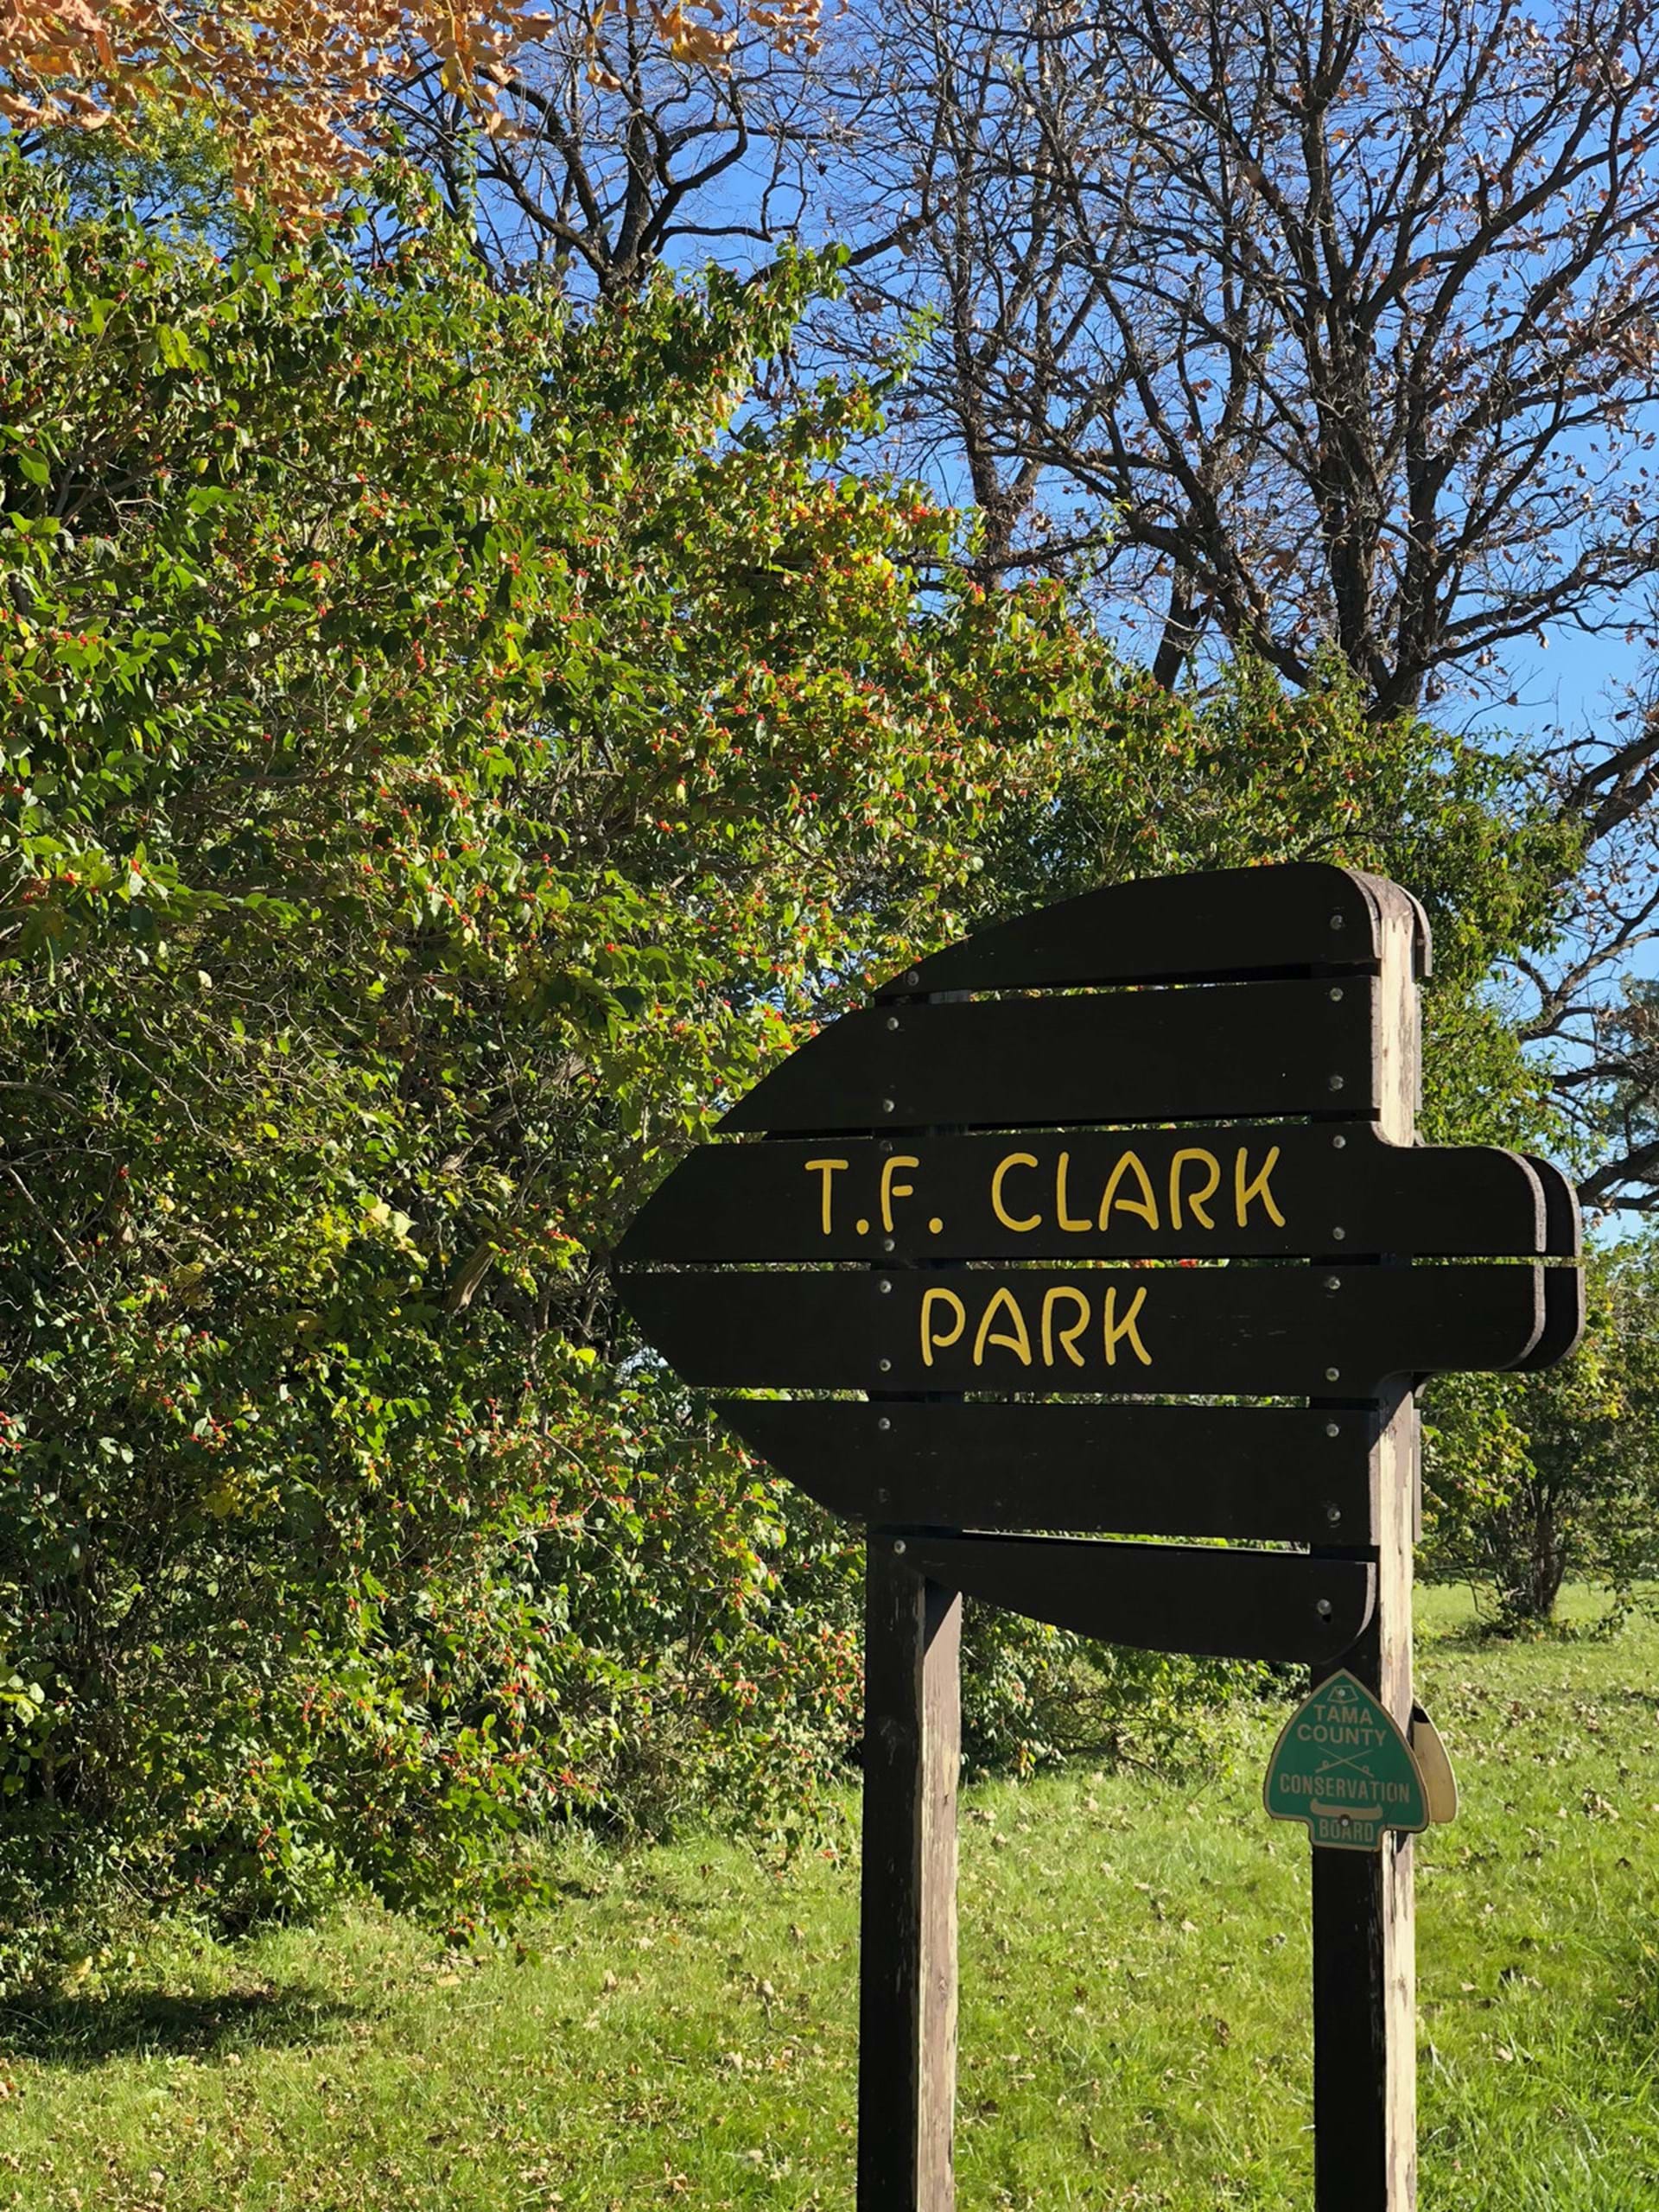 A rustic sign marks the park's entrance.